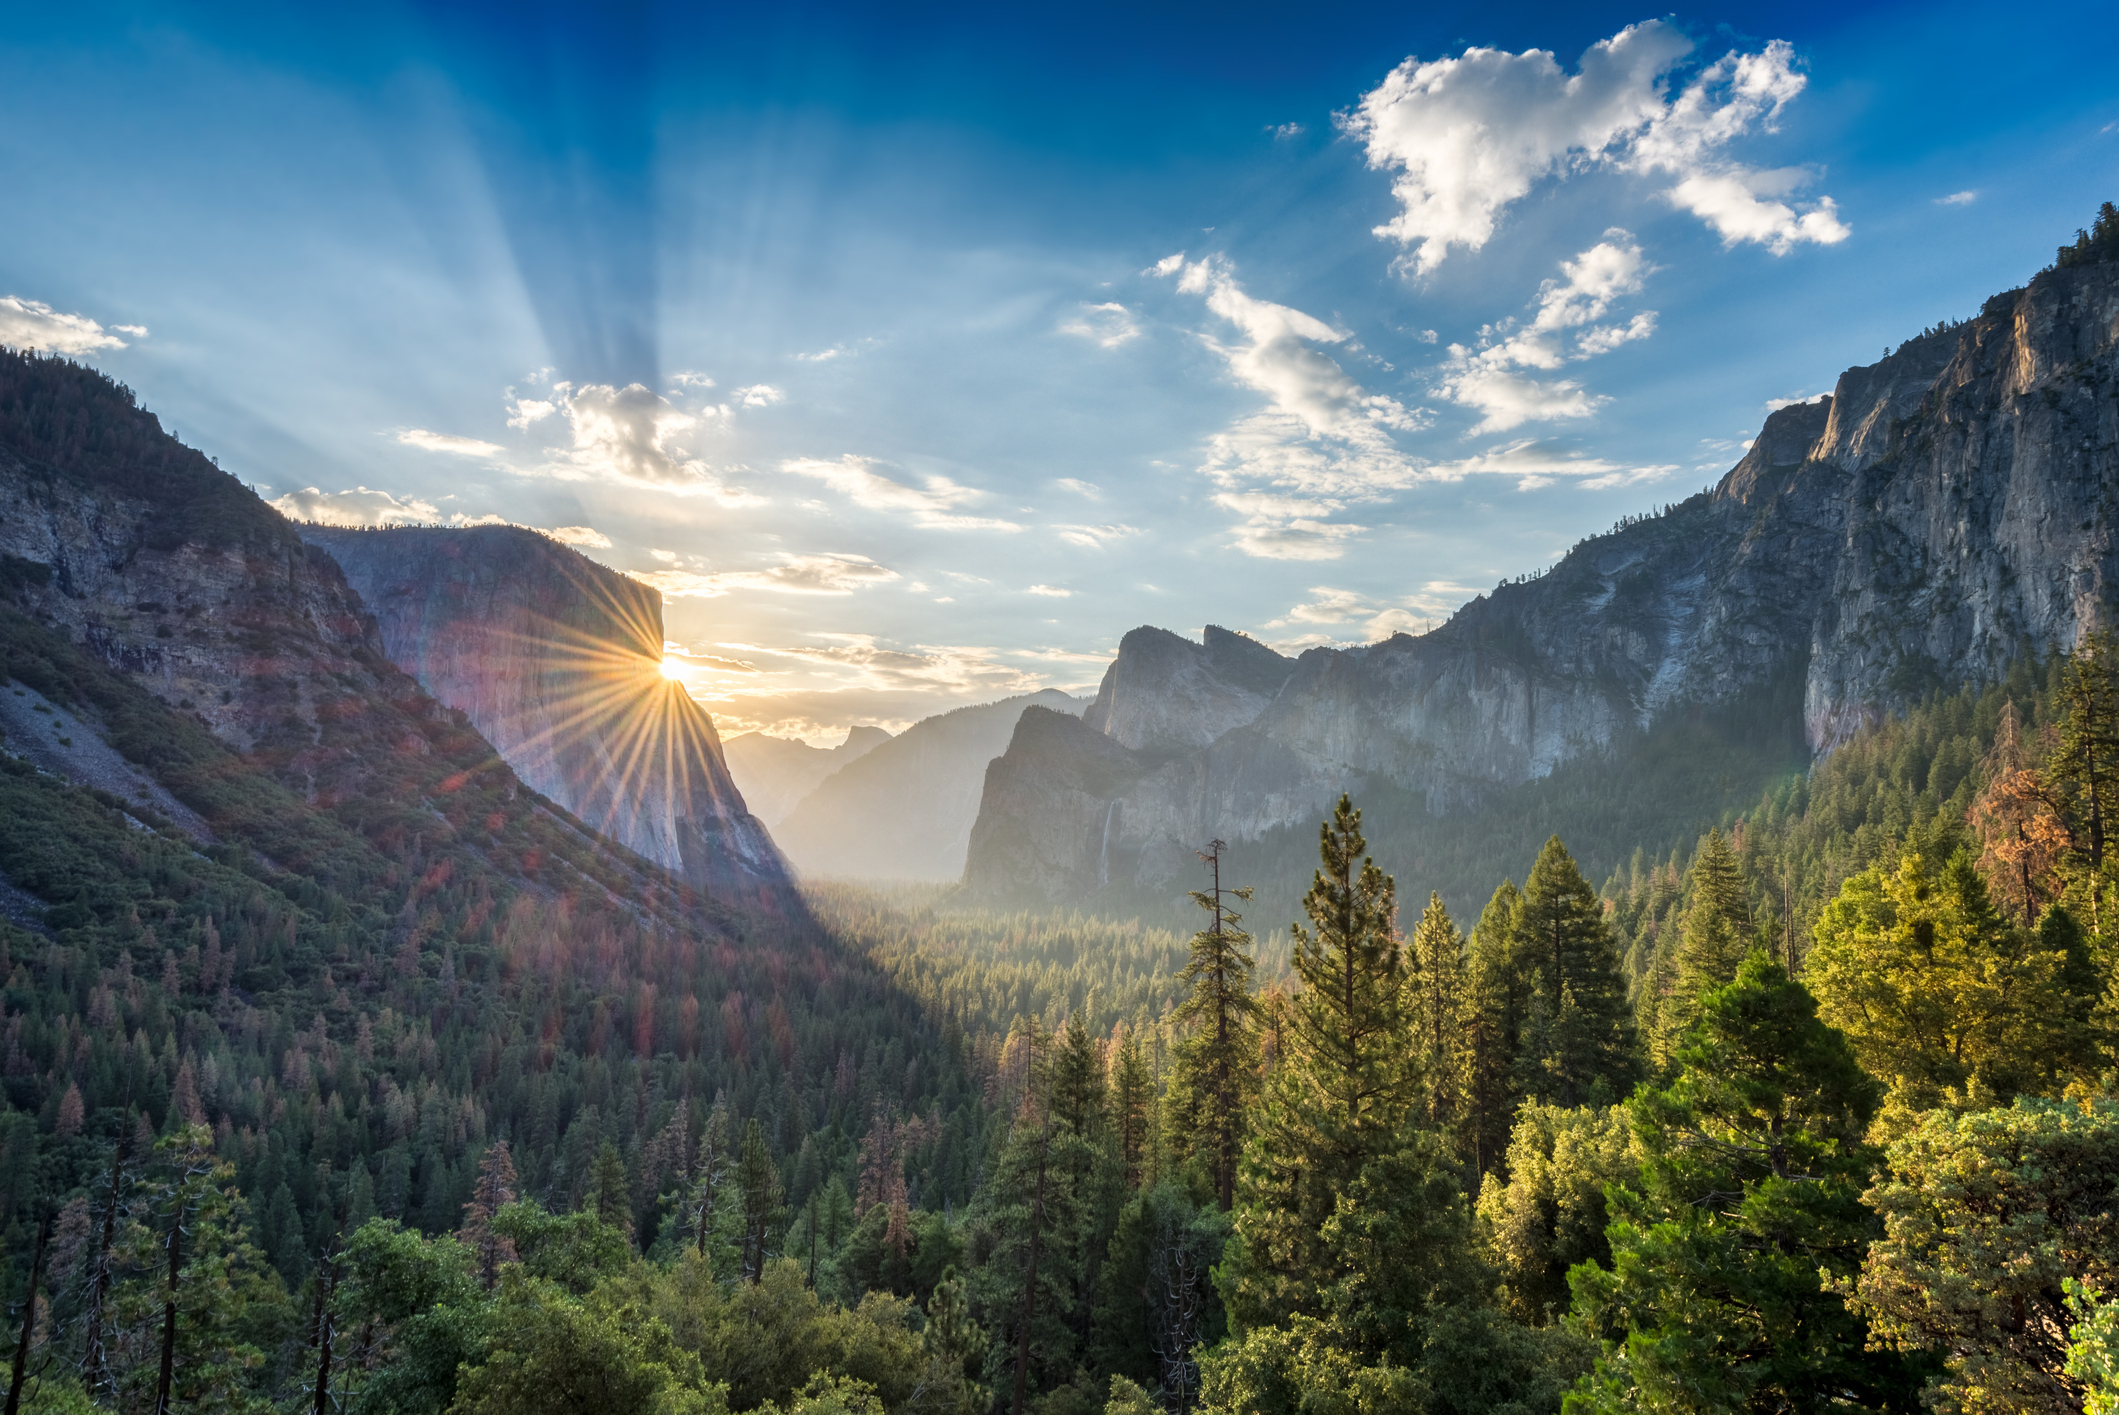 Yosemite National Park is one of the top 10 most visited national parks in the U.S.